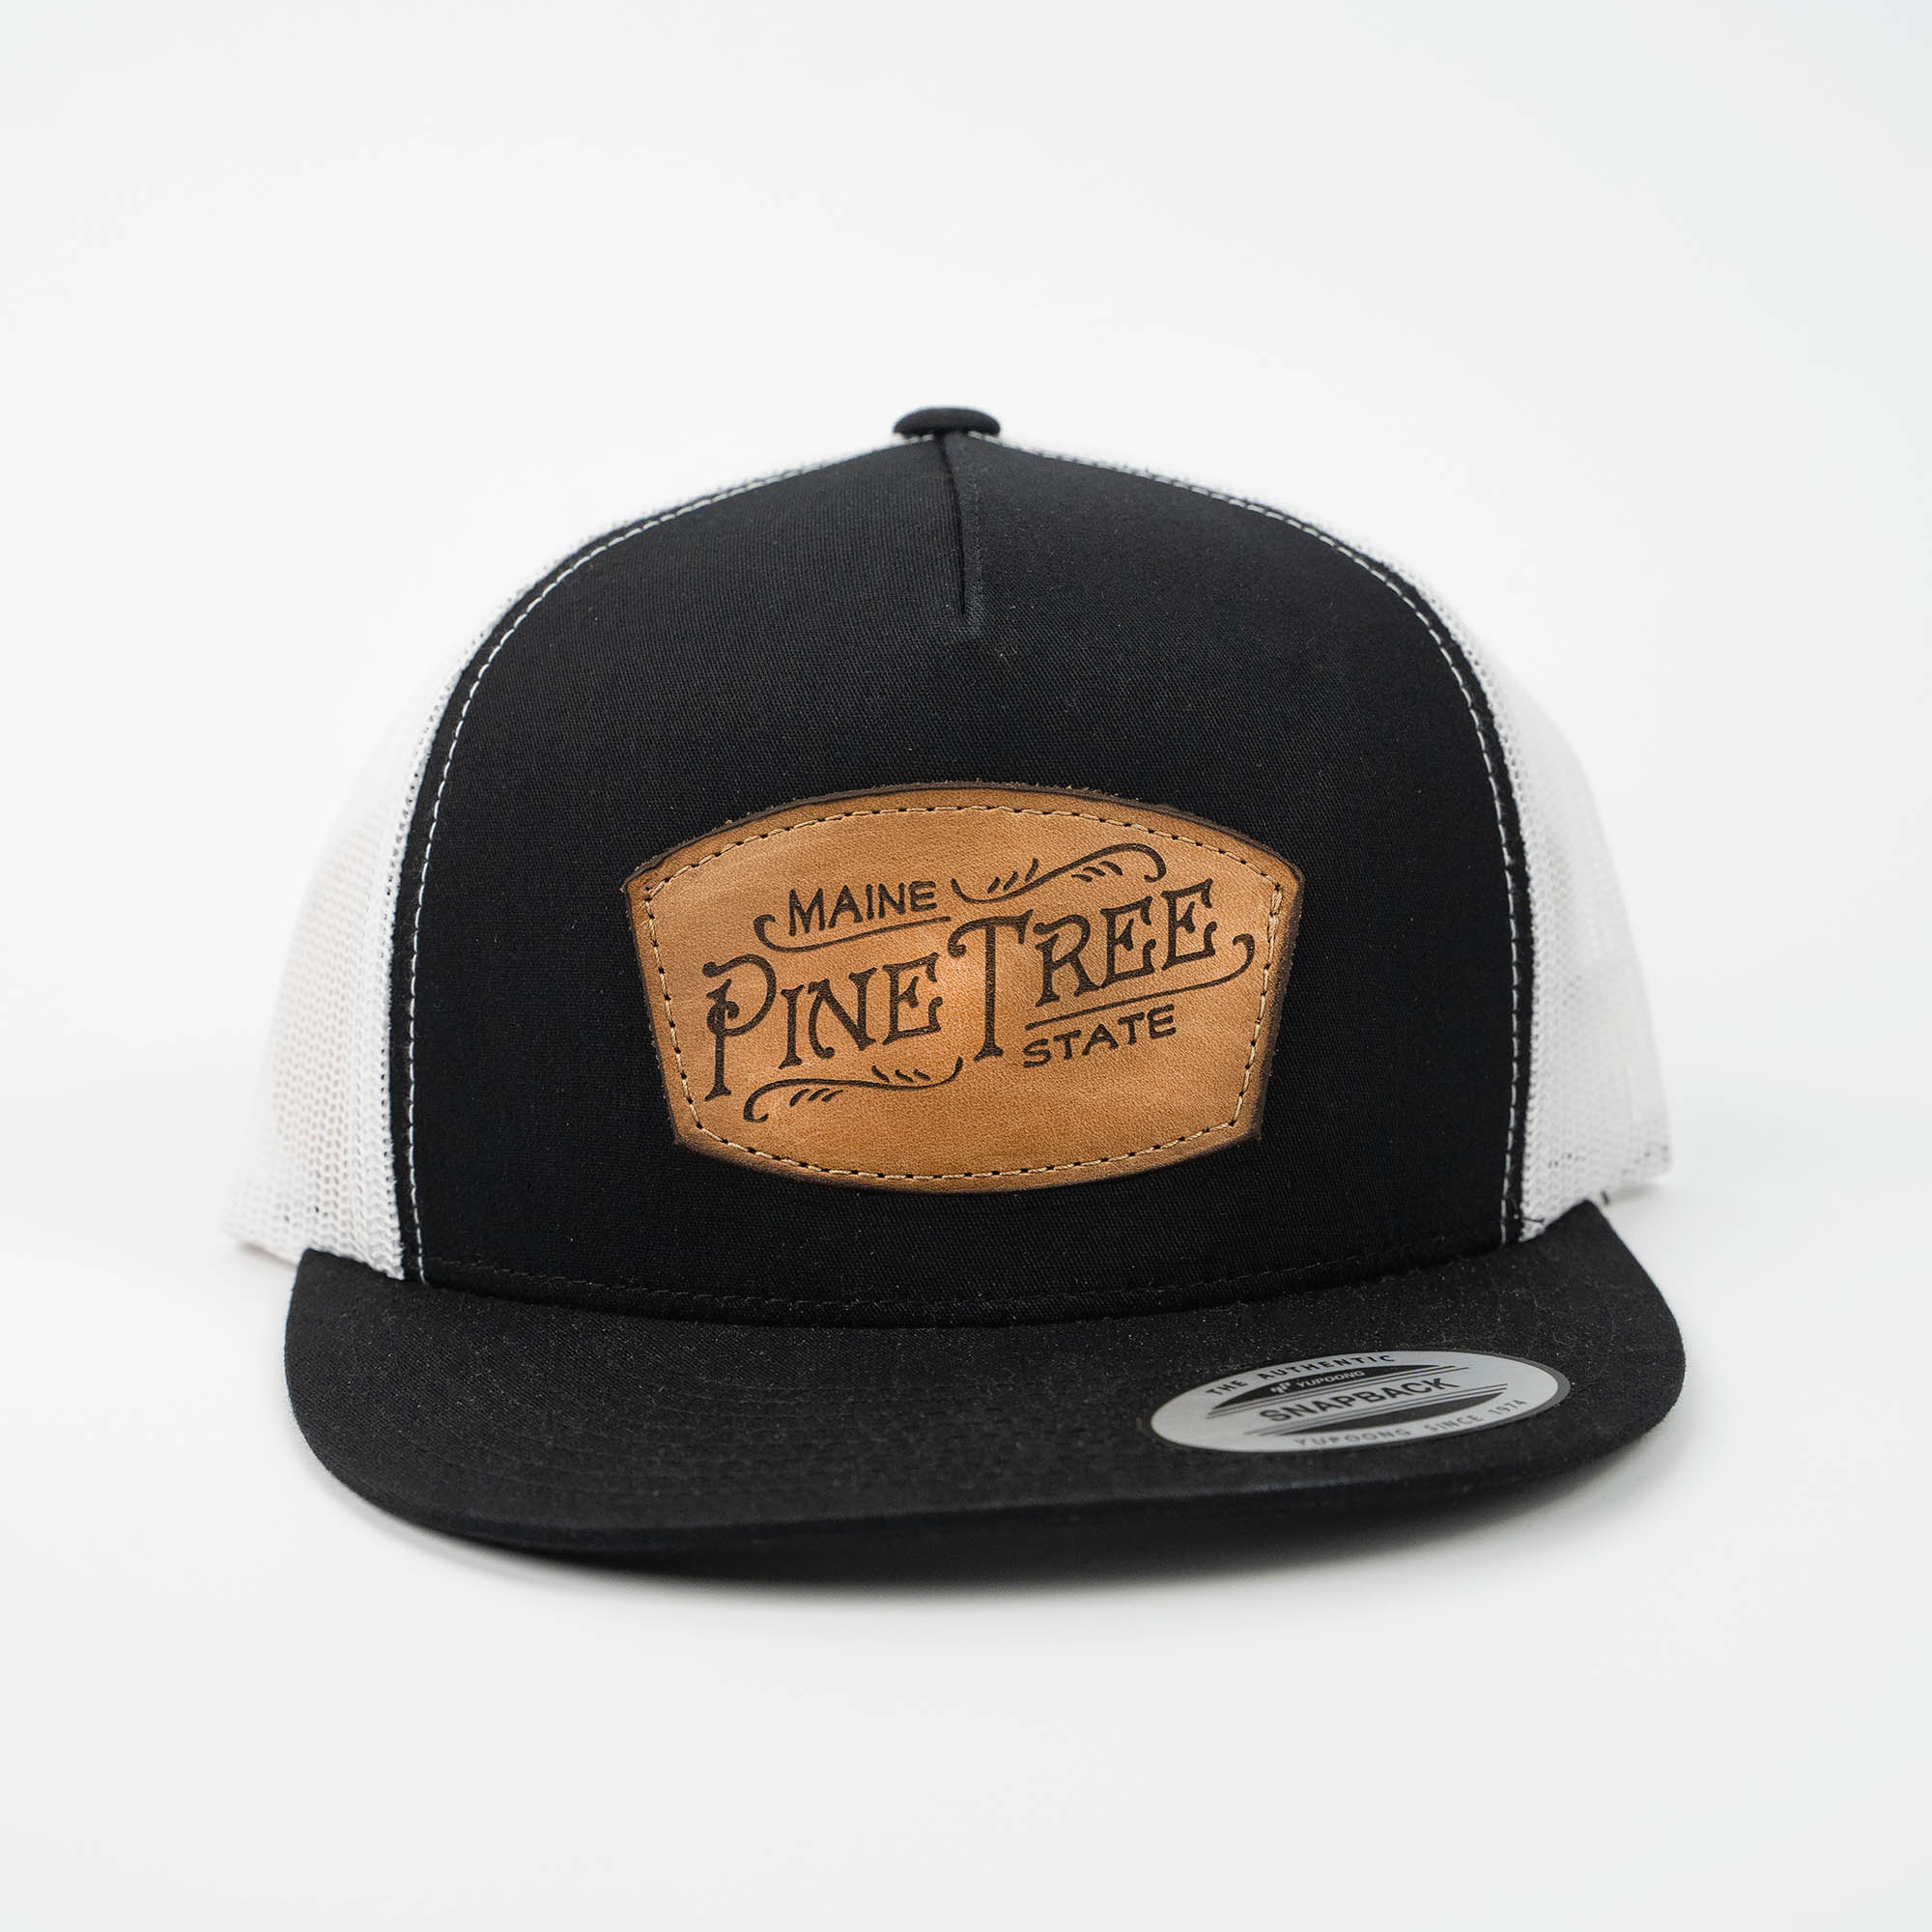 Lasered Leather Patch Trucker Mesh Snapback Hat ~ Yupoong 6006 Cap ~ Customized with YOUR LOGO